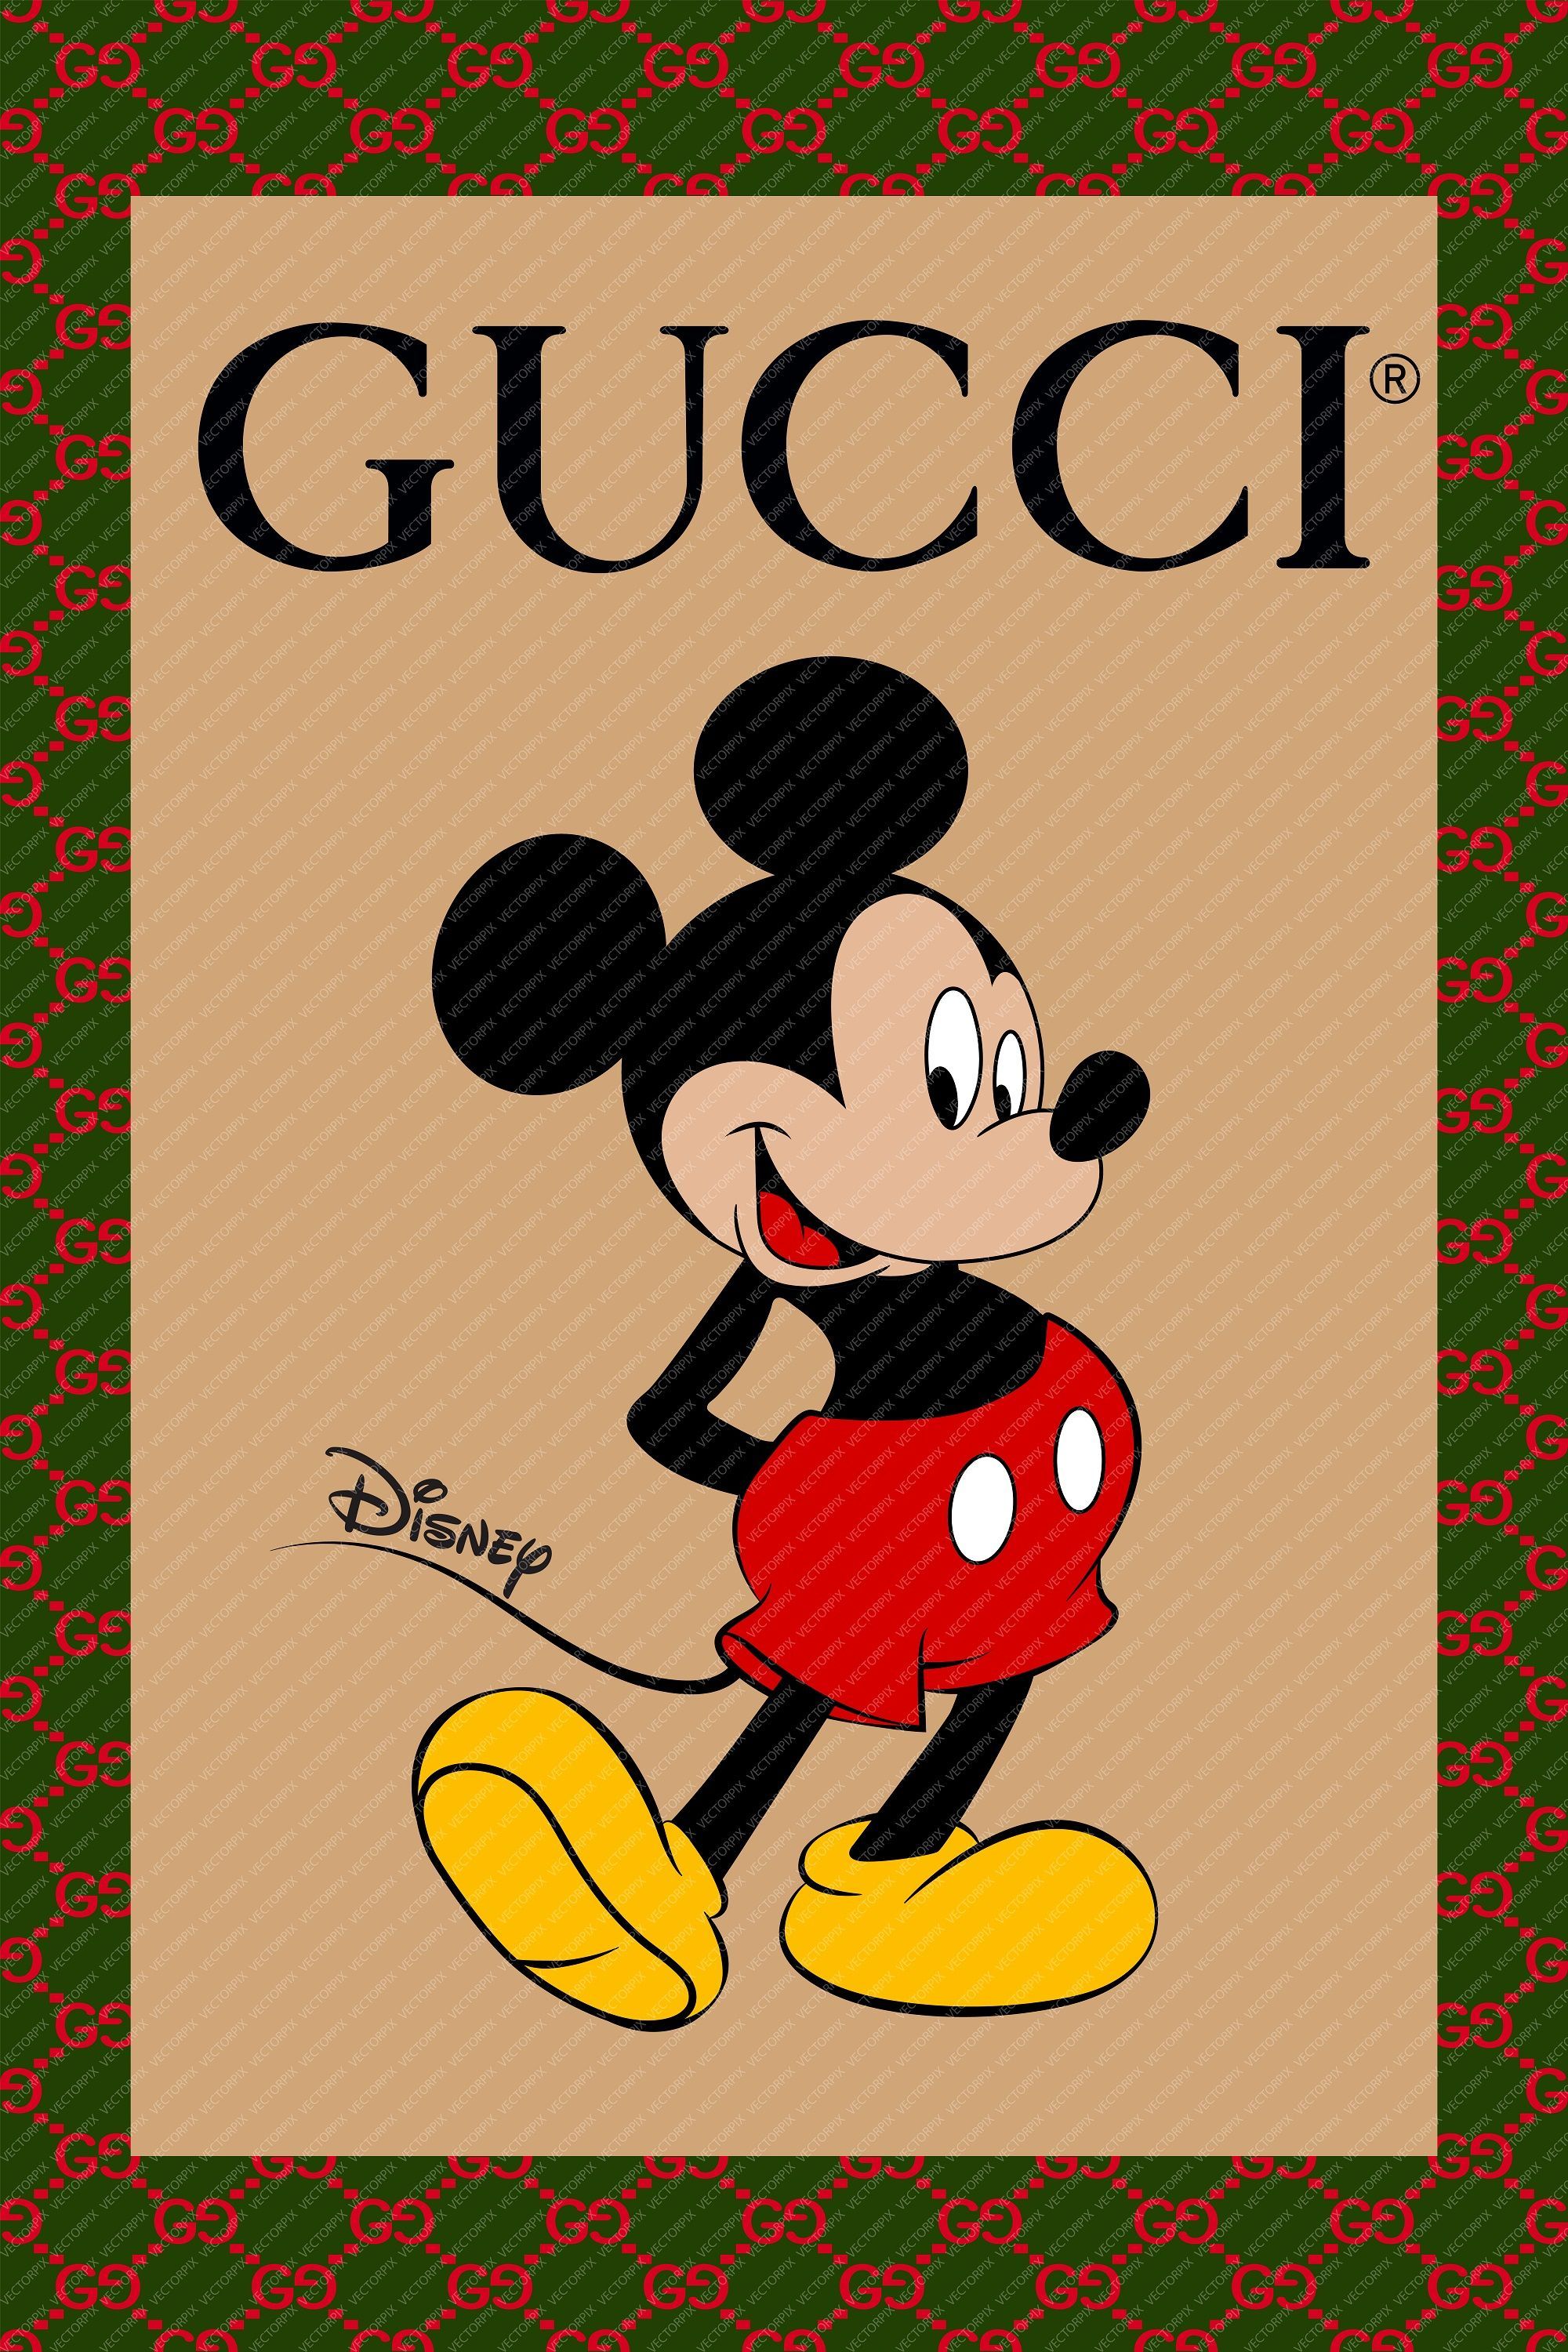 gucci mickey mouse wallpapers wallpaper cave on gucci shoes mickey mouse wallpapers